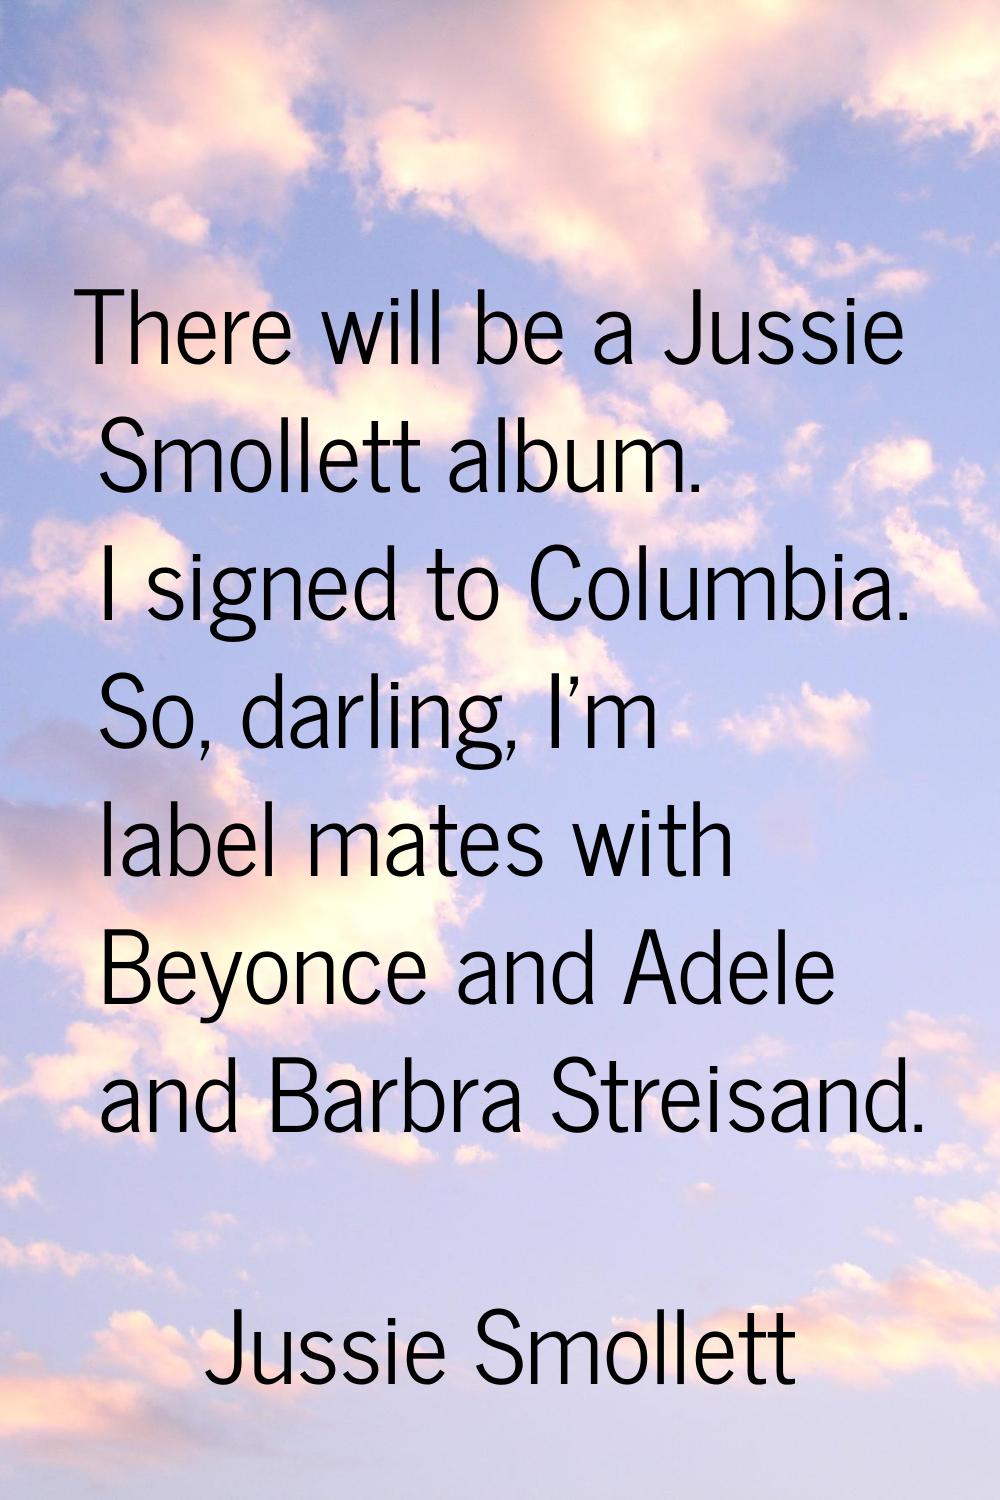 There will be a Jussie Smollett album. I signed to Columbia. So, darling, I'm label mates with Beyo